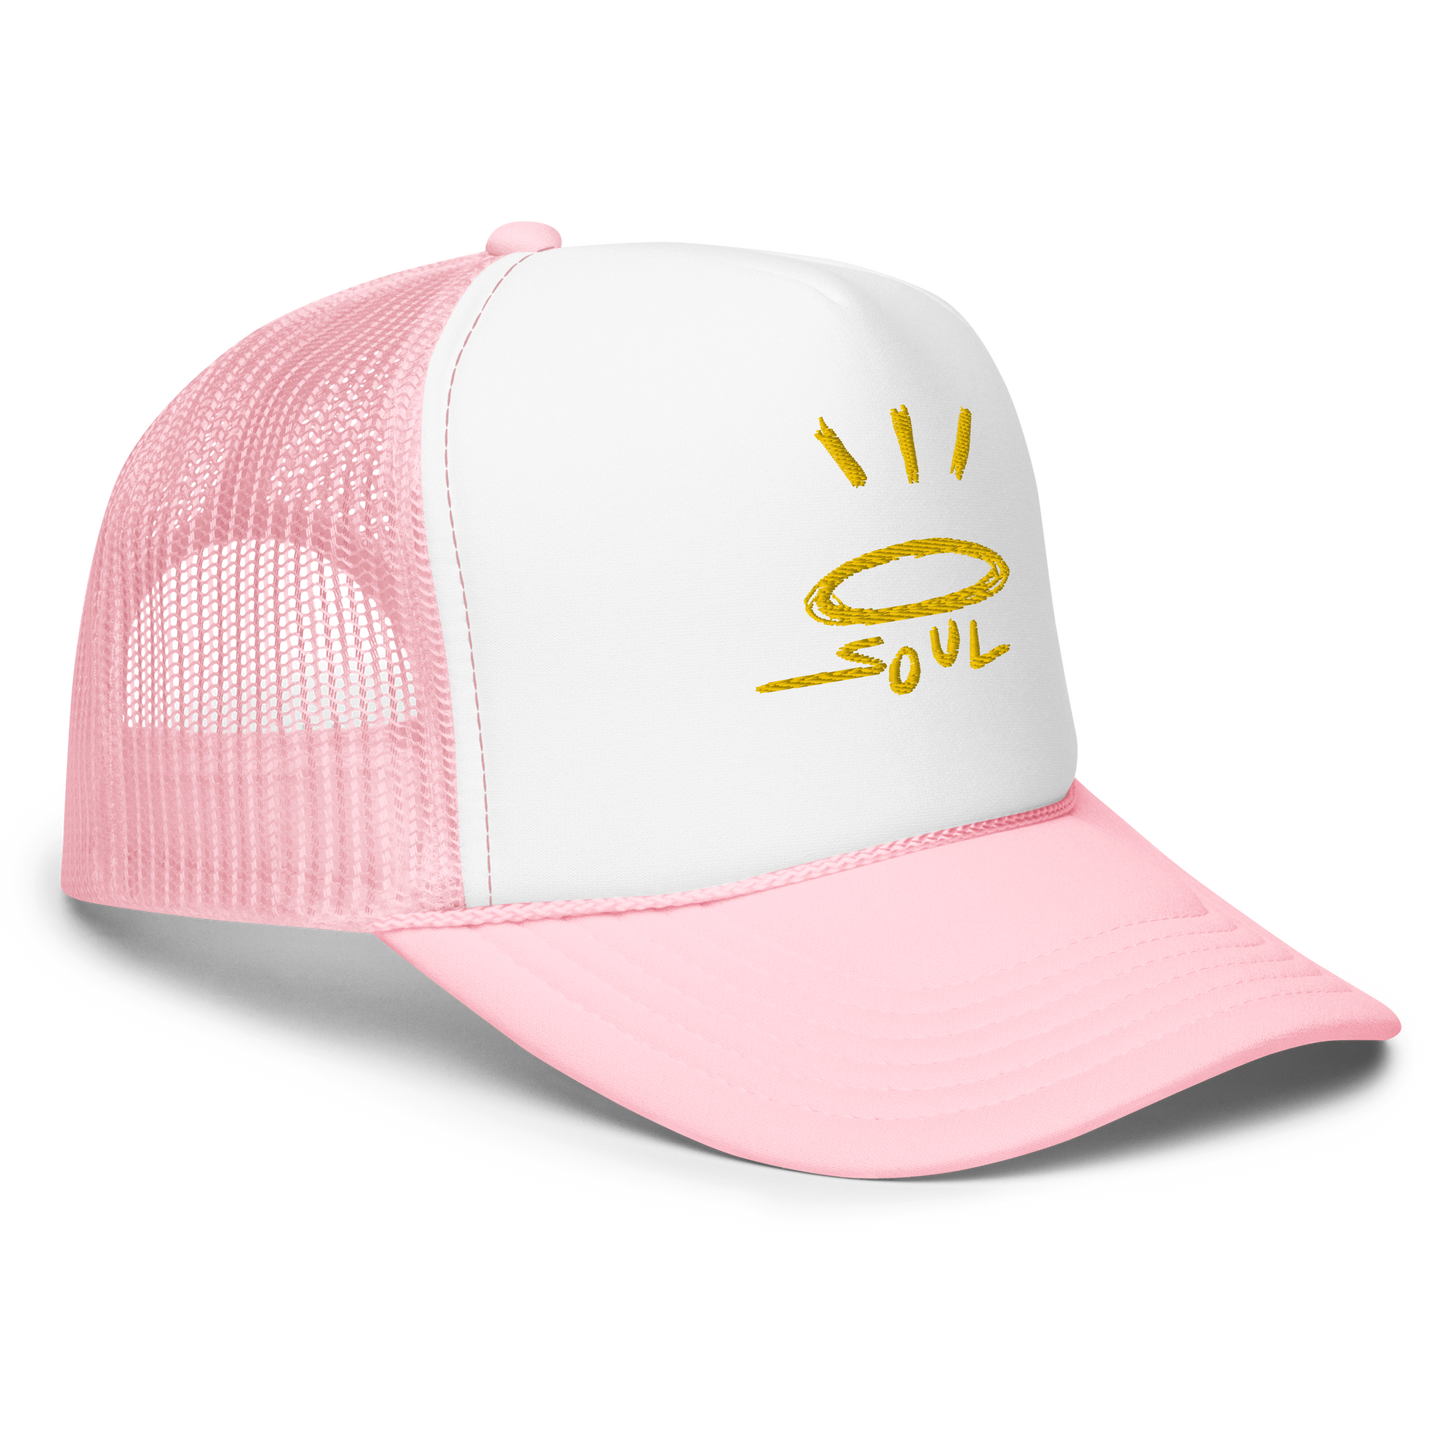 HALO "Samsara" ROSE PINK Embroidered 3-D Puff Trucker Hat x De La Soul Childs' Infamous Logo and Signature *FREE SHIPPING ON ME, LIMITED TIME*